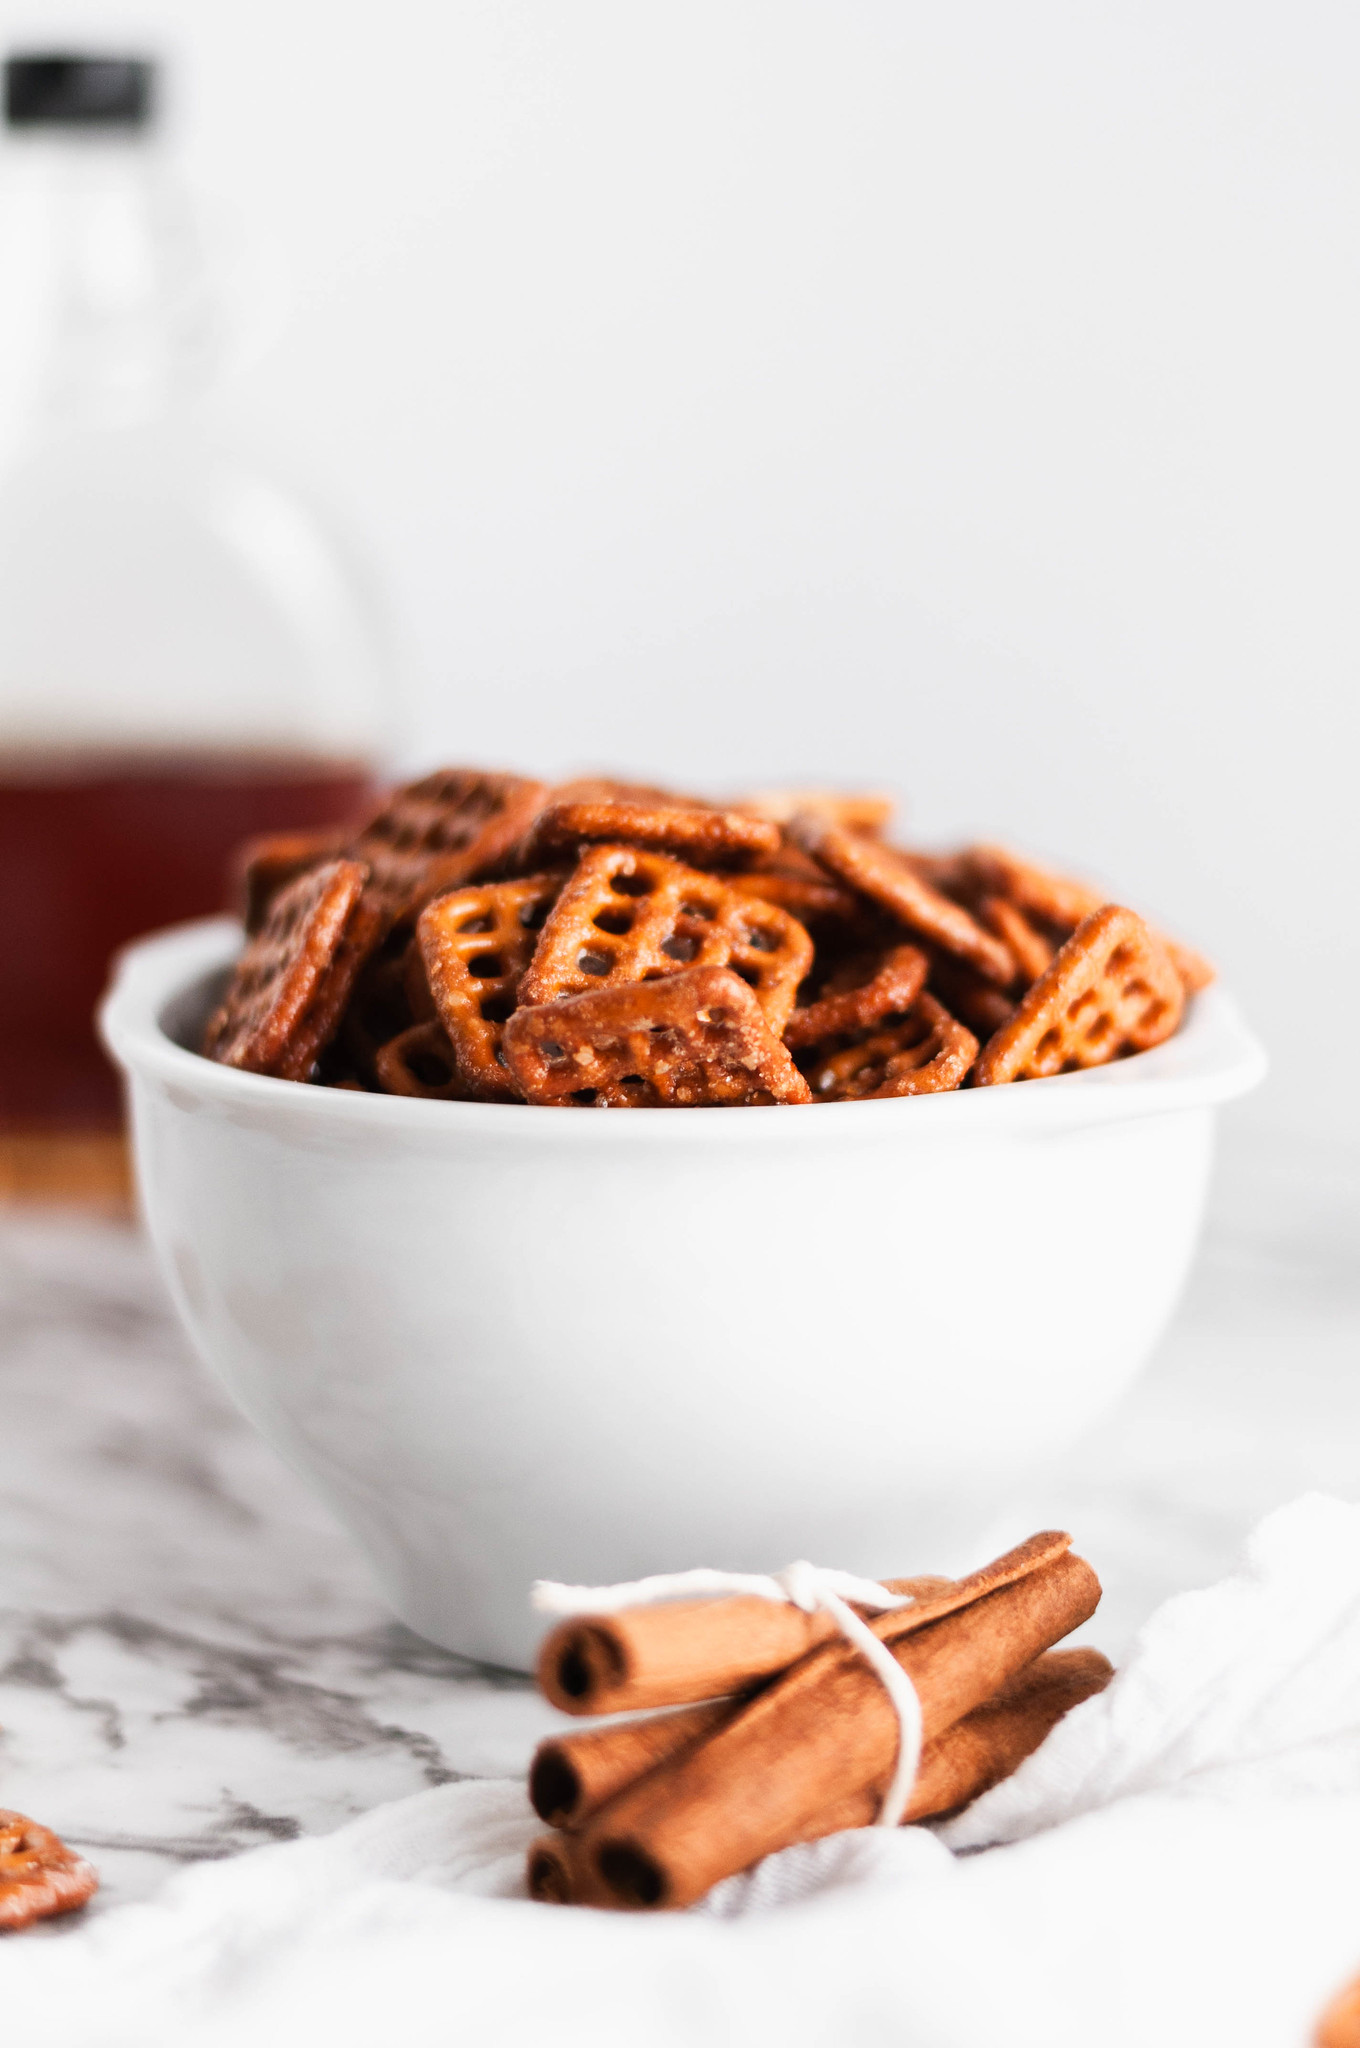 Meet your new fall snack addiction, Maple Cinnamon Pretzels. Super crunchy, sweet and full of warm fall flavors.